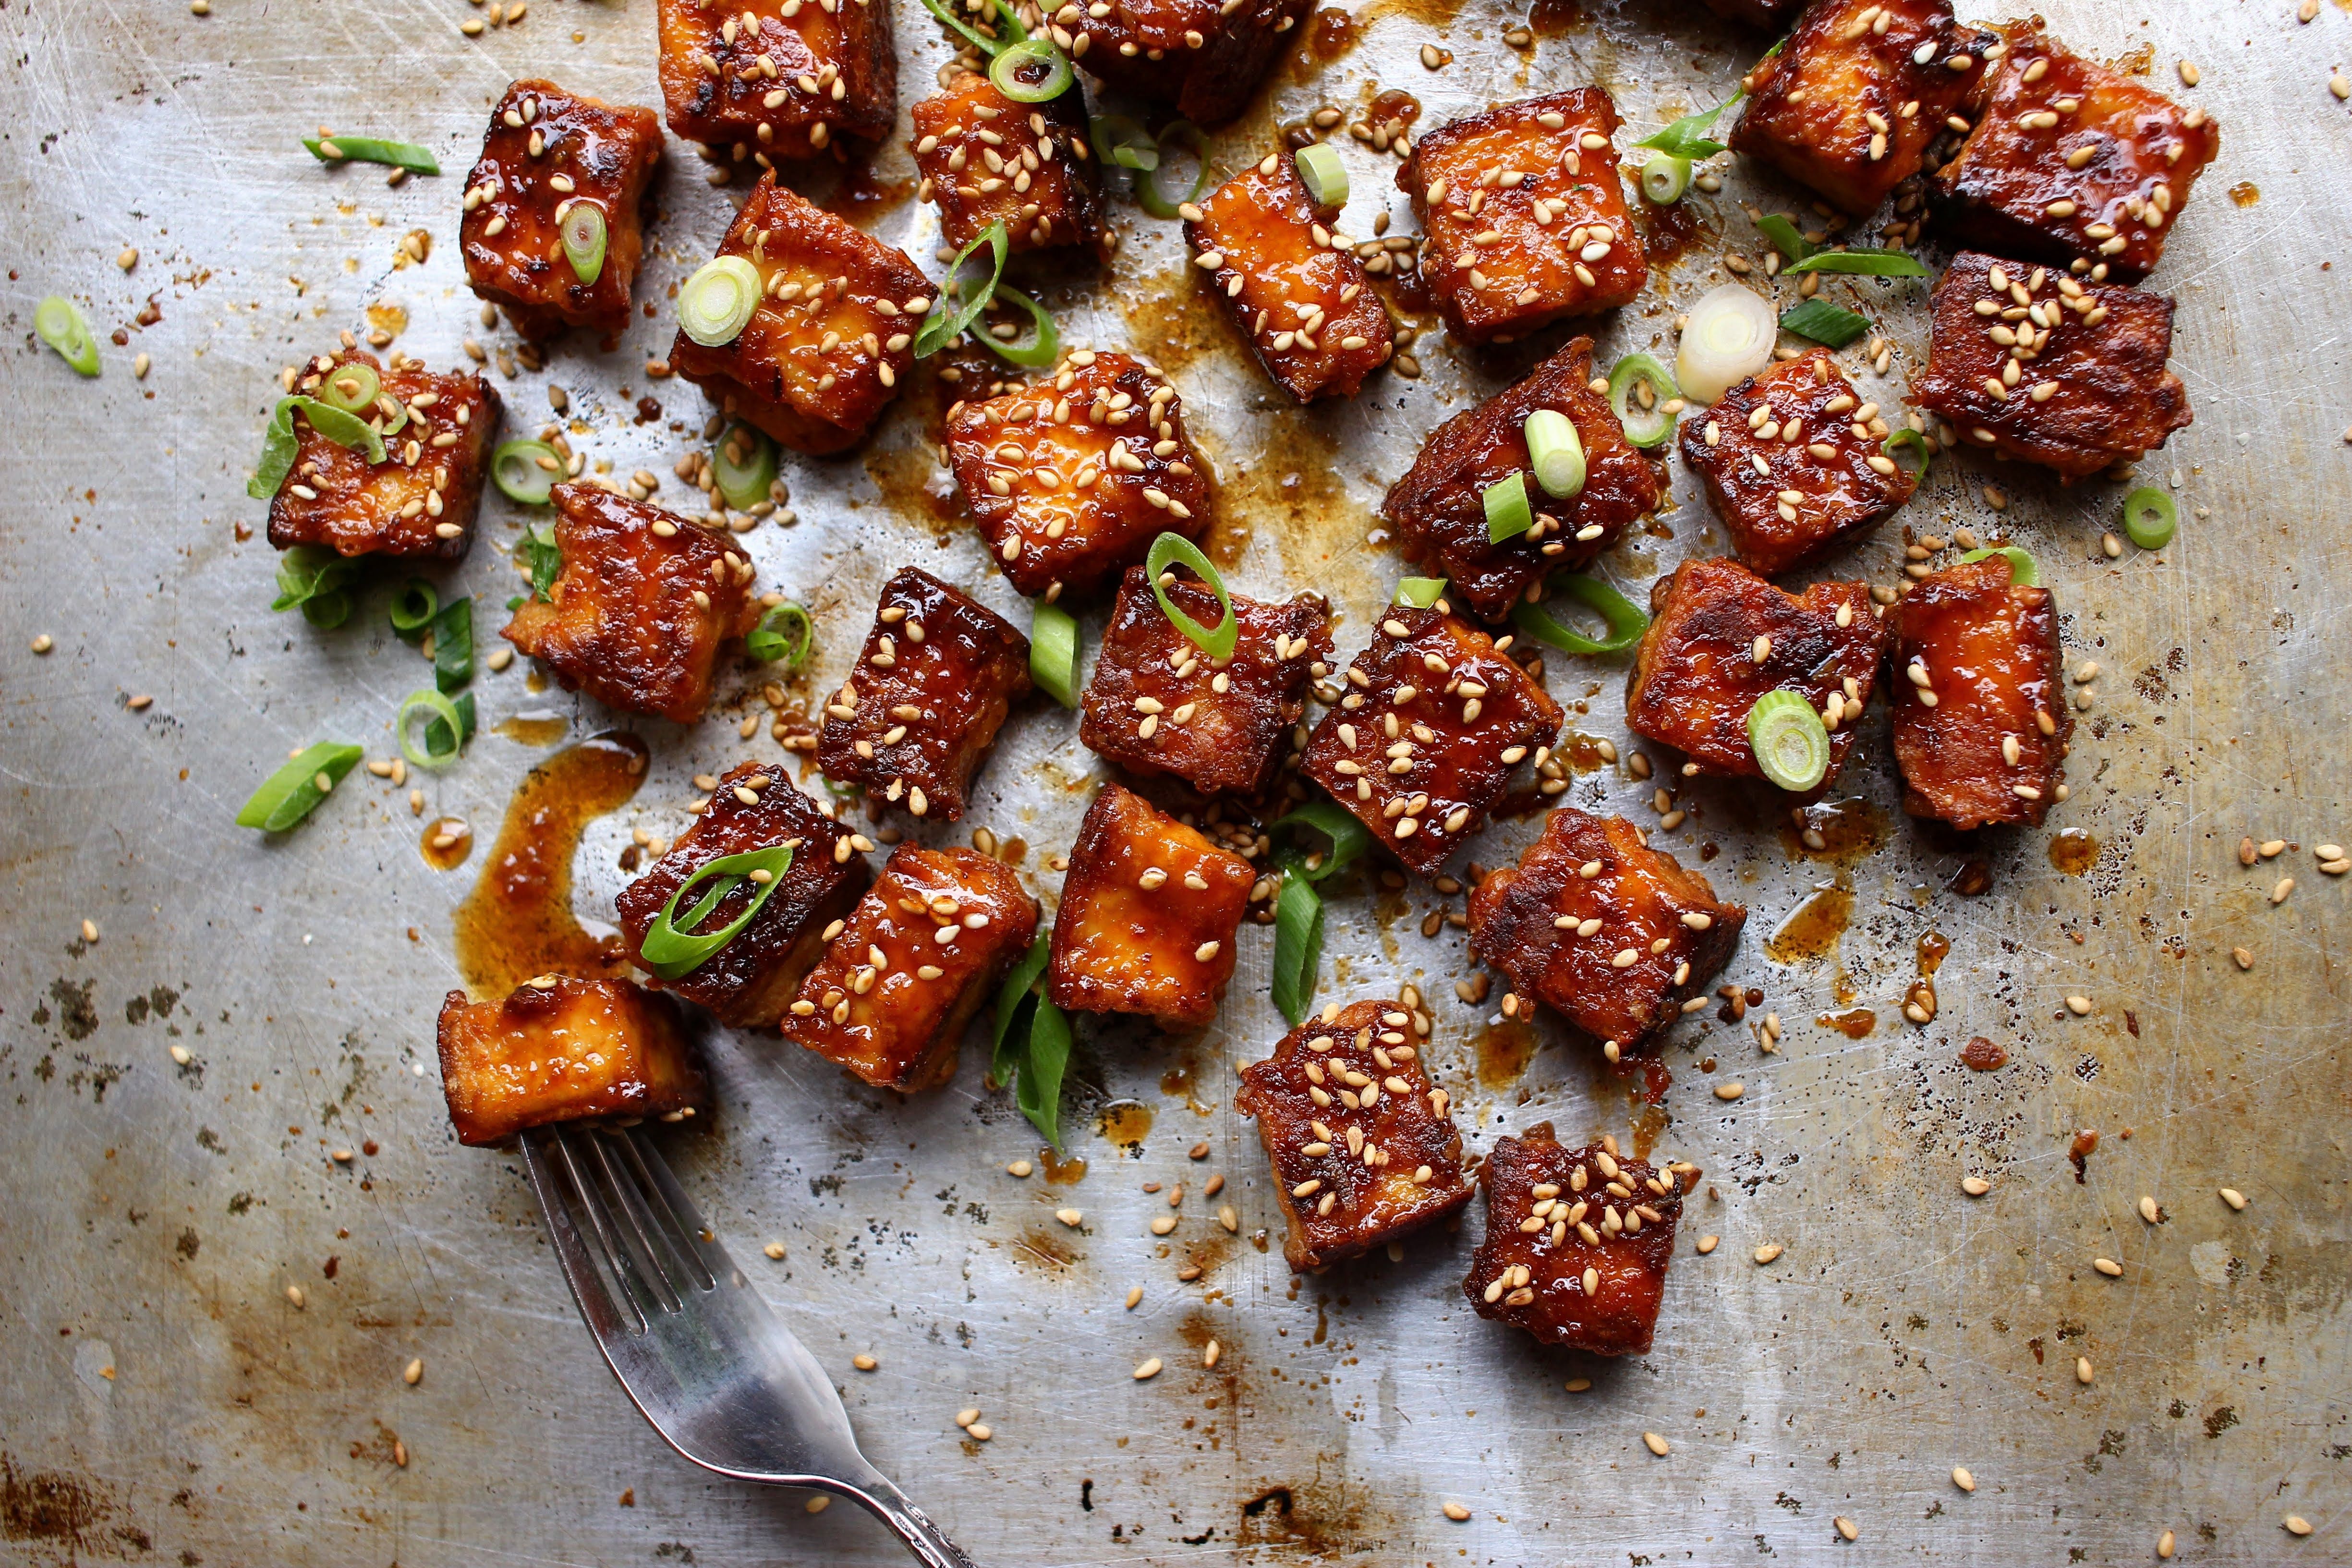 Extra Firm Tofu Recipes - These types of tofu can be pressed to remove even more of the water.